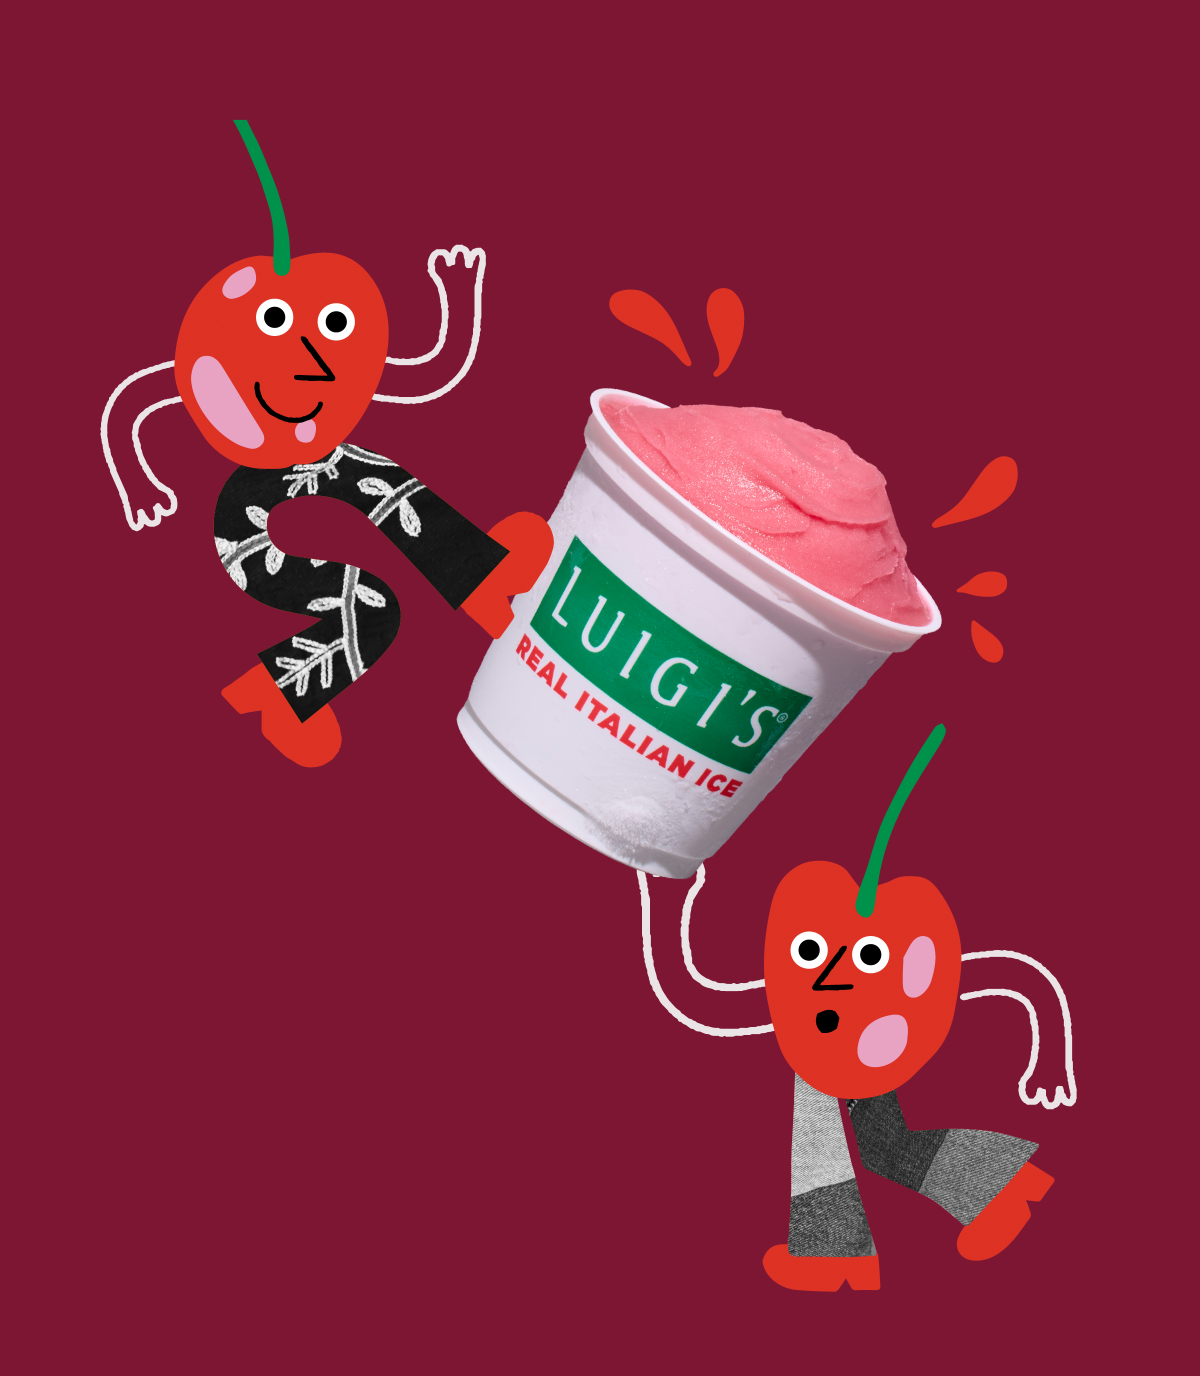 Two cherry graphic characters with a cup of cherry LUIGI'S Real Italian Ice. Once cherry is holding the cup, and the other cherry is walking up the side of the cup of Italian ice. Background is a deep cherry red.